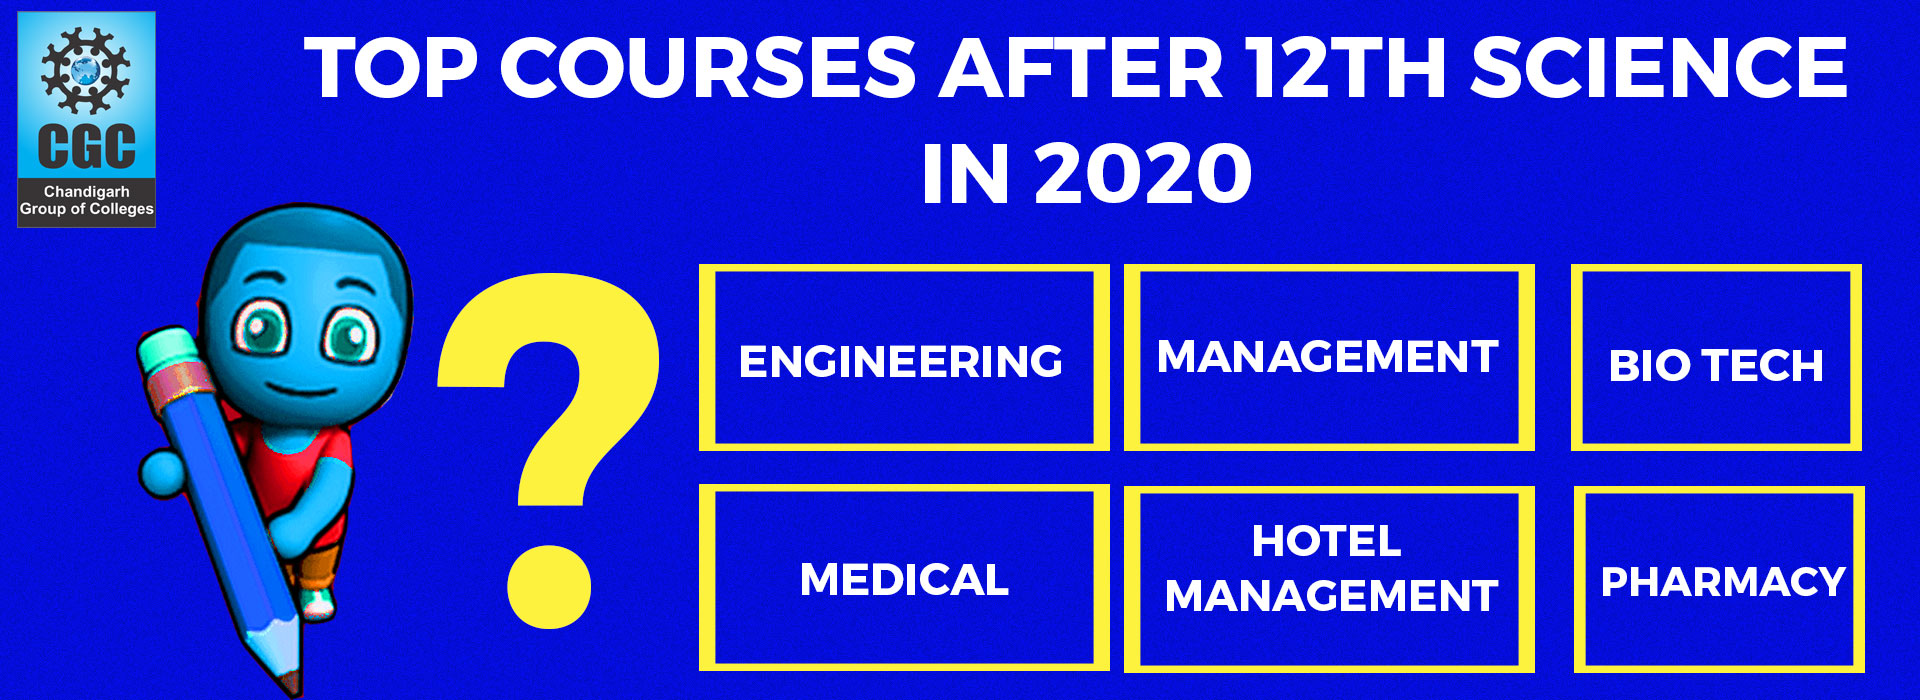 Top Courses After 12th Science in 2020 